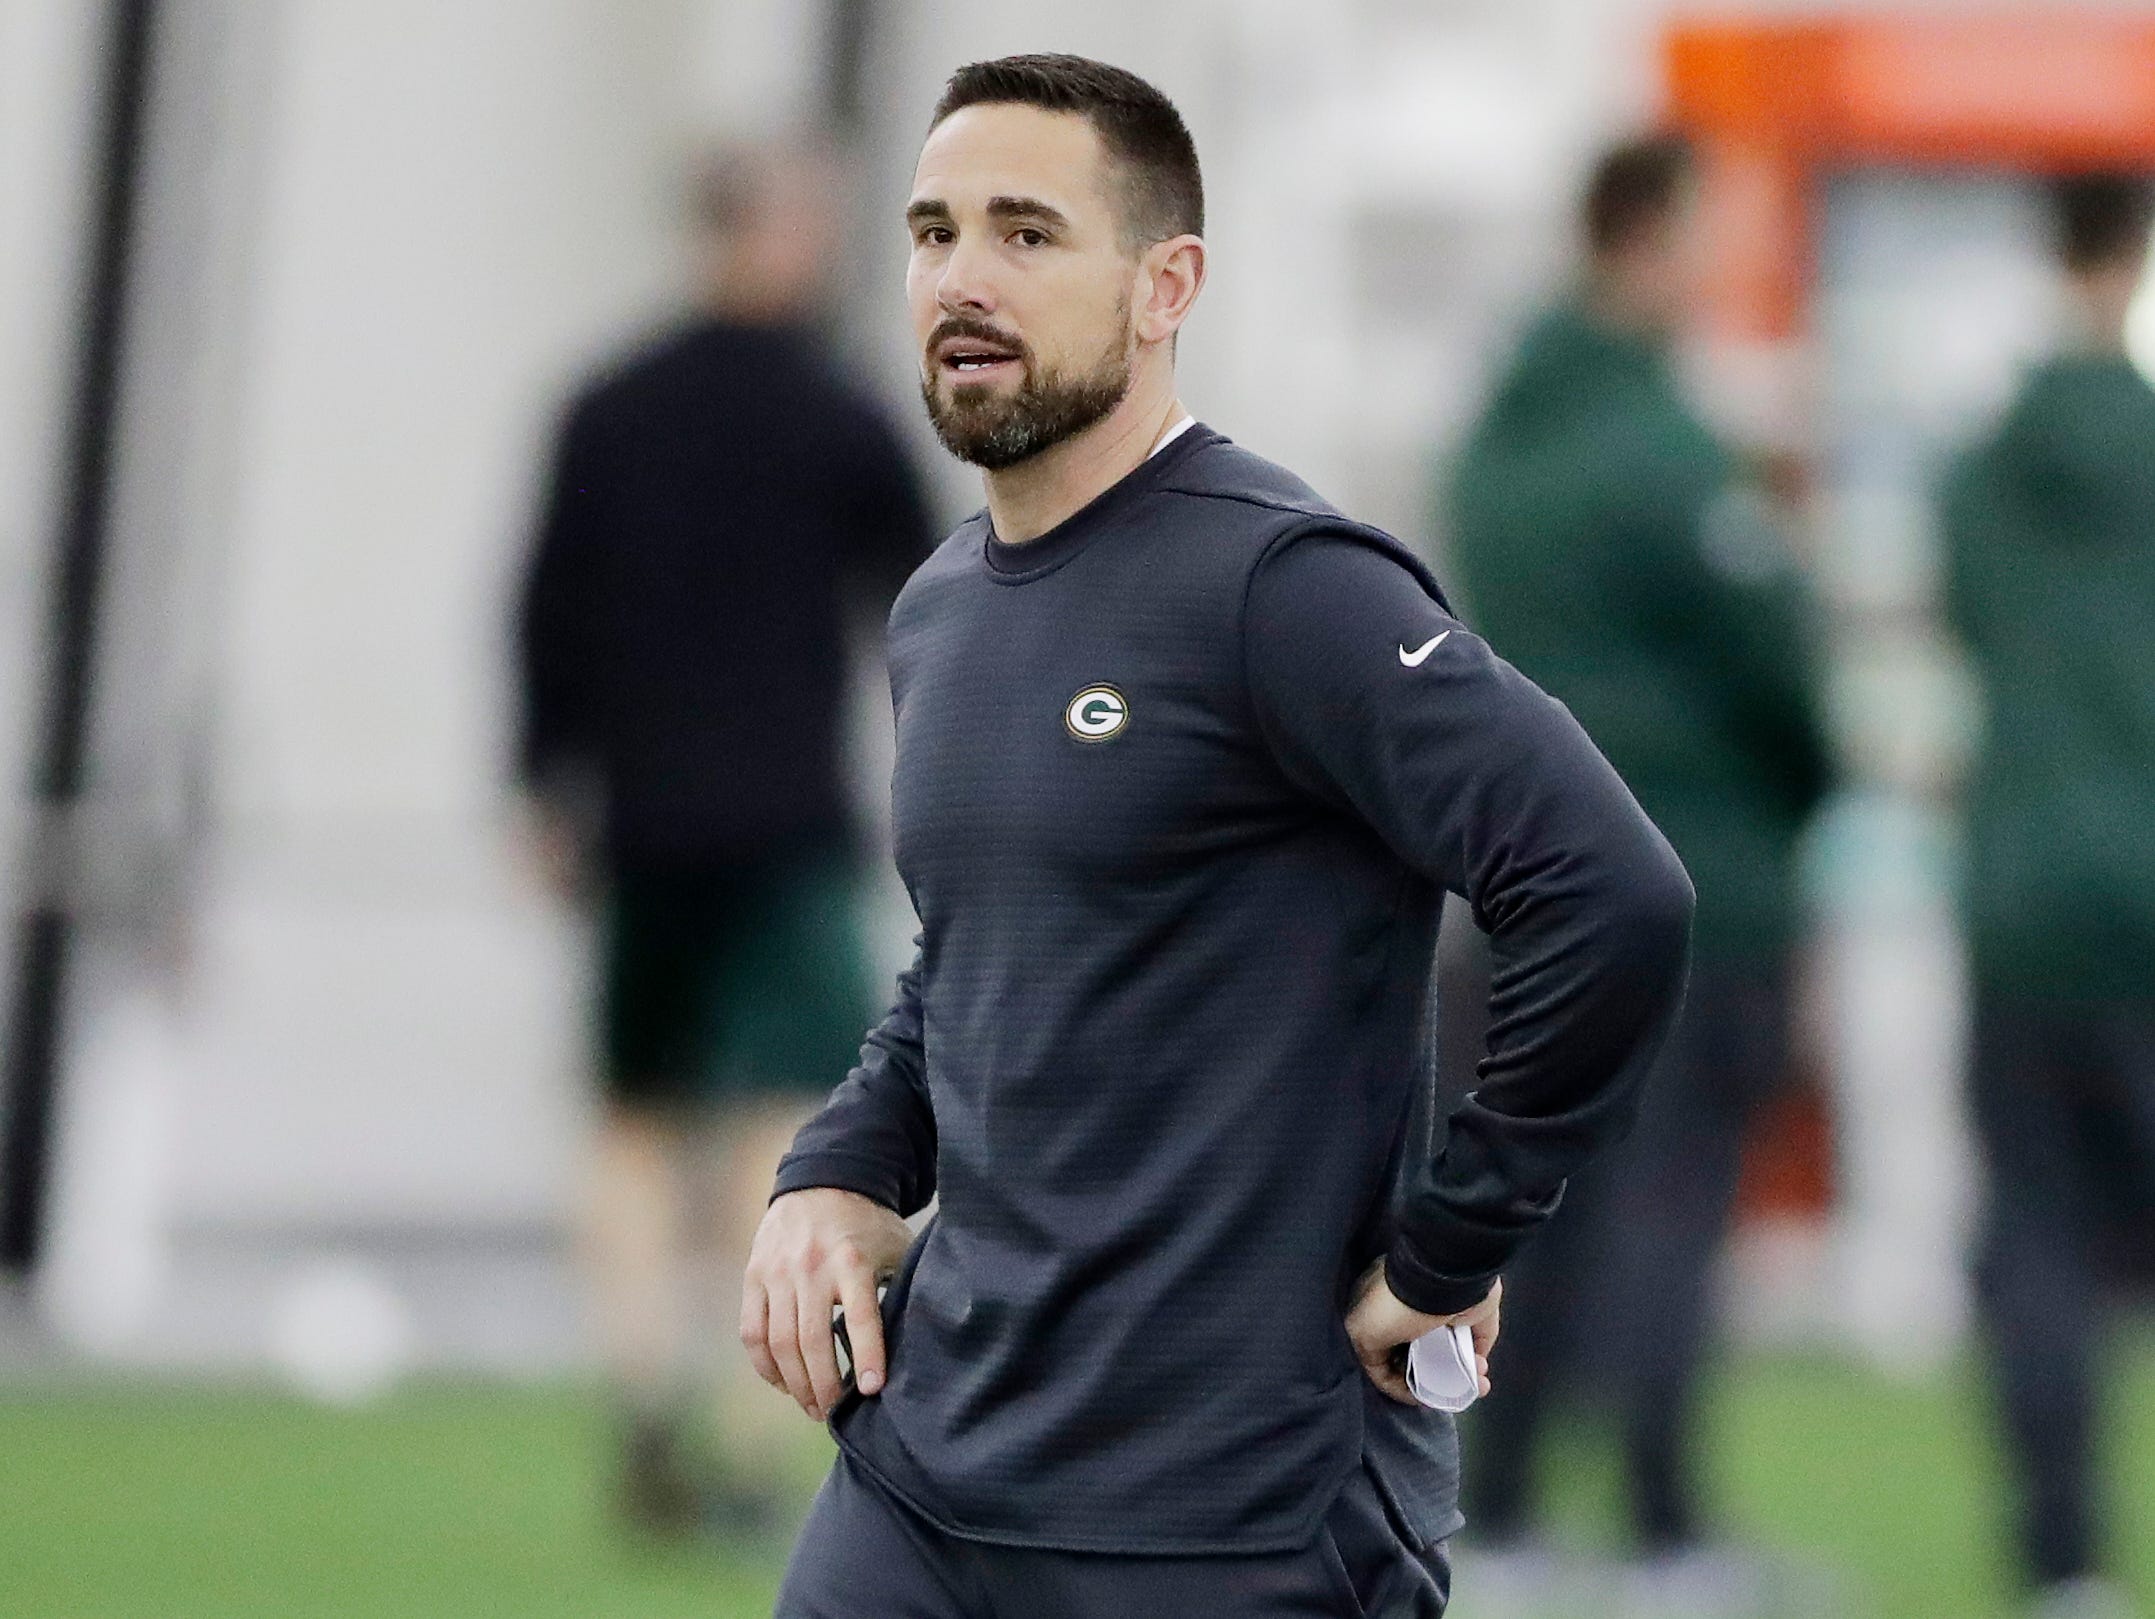 Green Bay Packers head coach Matt LaFleur during practice at rookie minicamp at the Don Hutson Center on Friday, May 3, 2019 in Ashwaubenon, Wis.
Adam Wesley/USA TODAY NETWORK-Wis